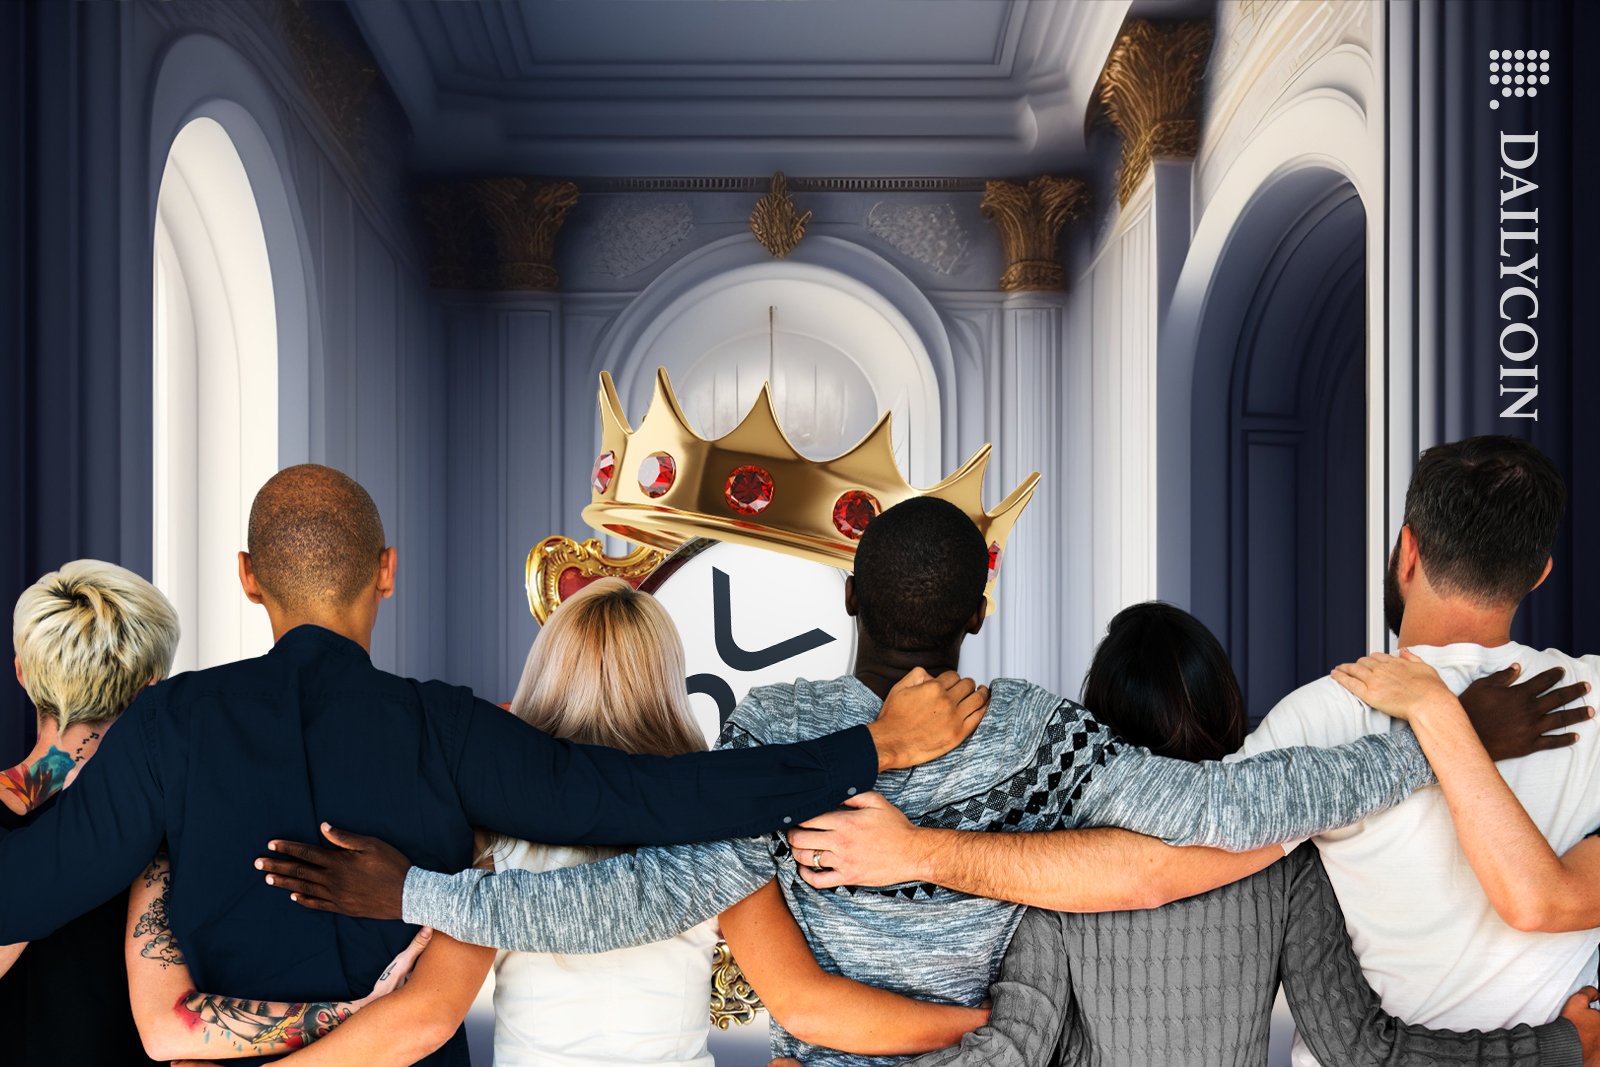 XRP coin is crowned sitting on the throne while a community of people joined together looking at it.